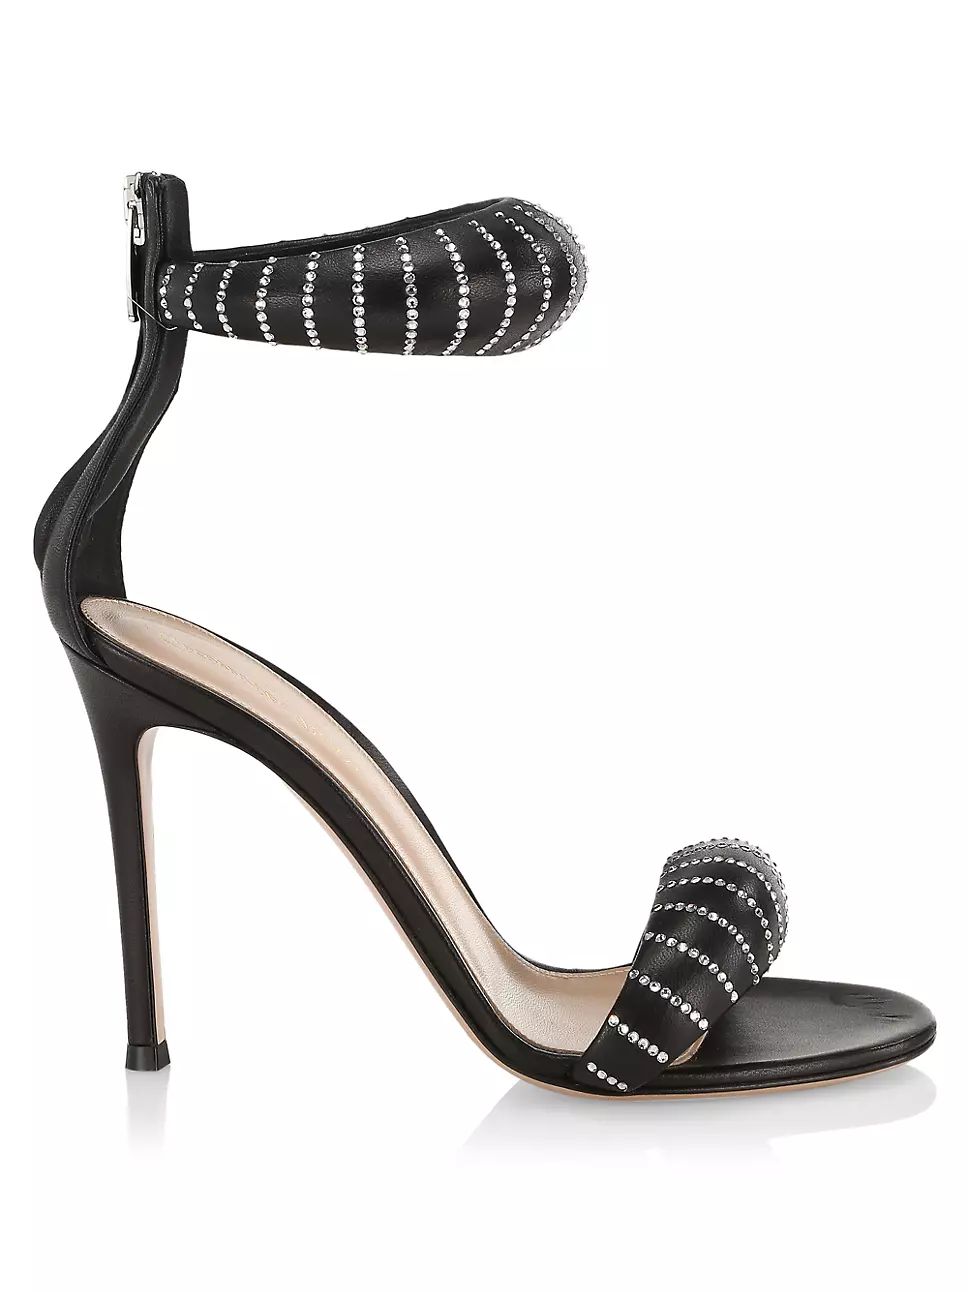 Gianvito Rossi Bijoux Sequined Nappa Leather Sandals | Saks Fifth Avenue